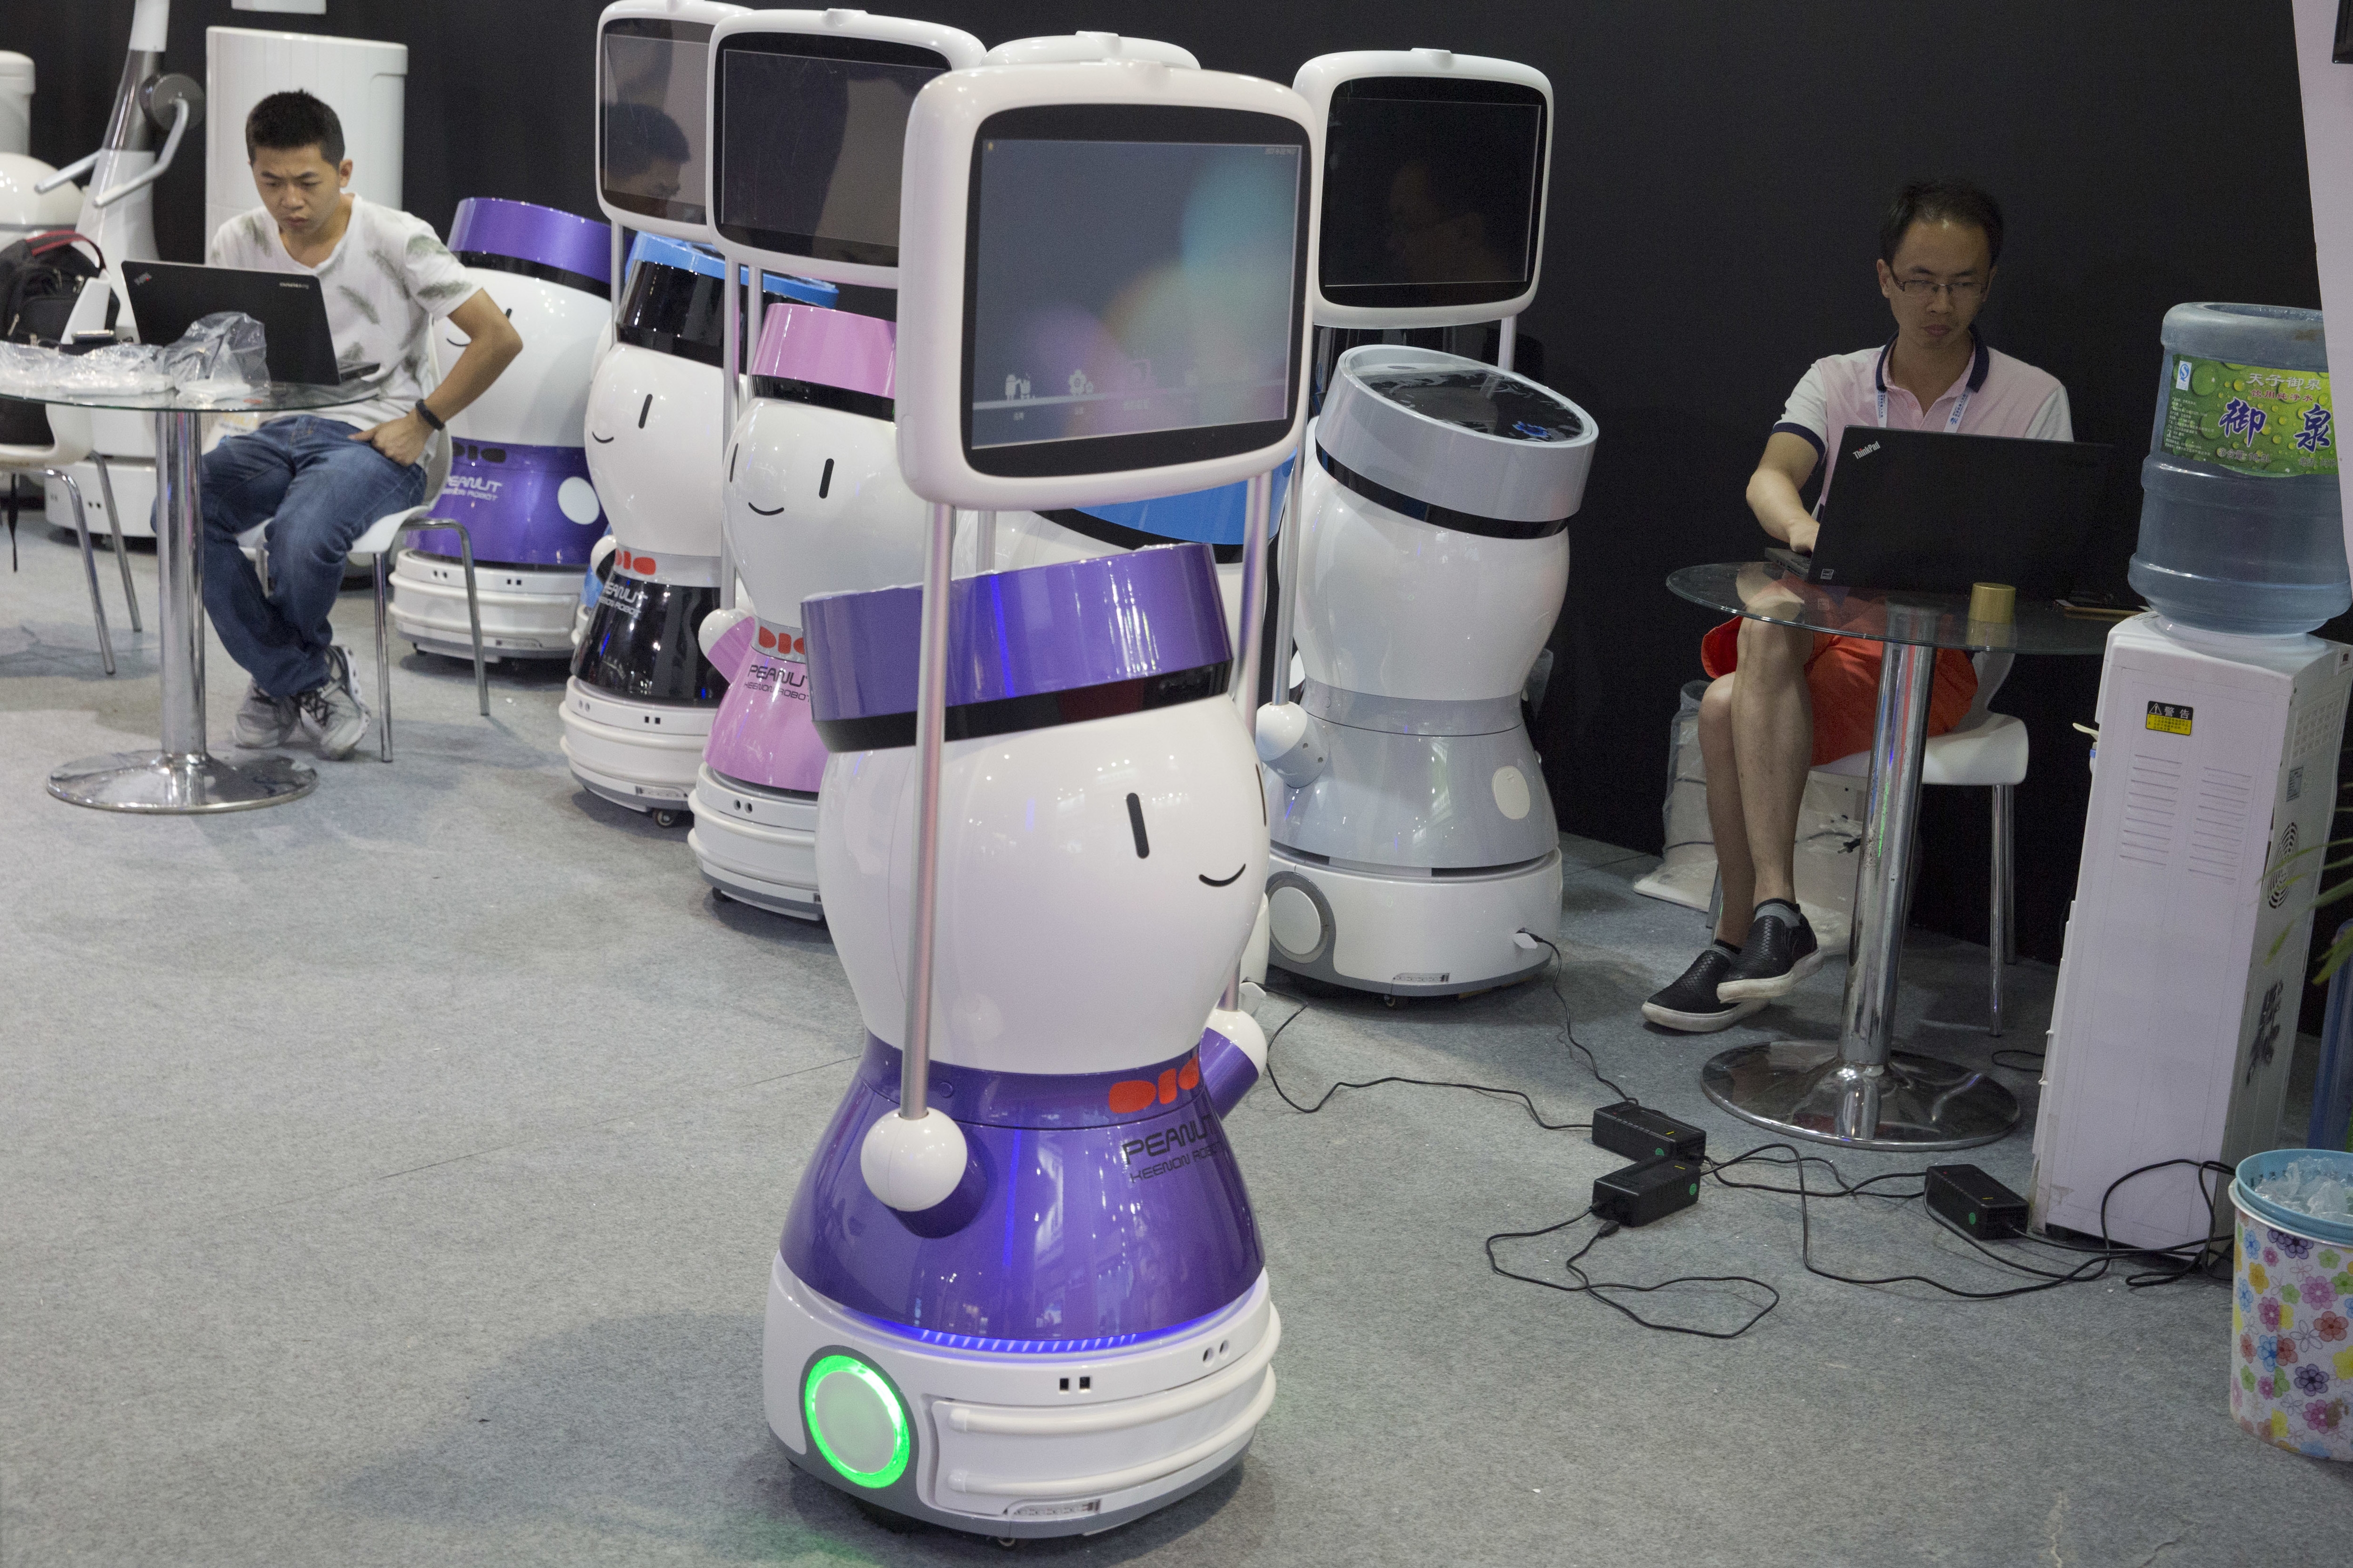 Engineers prepare robots a day before the opening of the World Robot Conference held in Beijing, China, Tuesday, Aug. 22, 2017. The annual conference is a showcase of China's burgeoning robot industry ranging from companion robots to those deployed on manufacturing assembly line and entertainment. (AP Photo/Ng Han Guan)